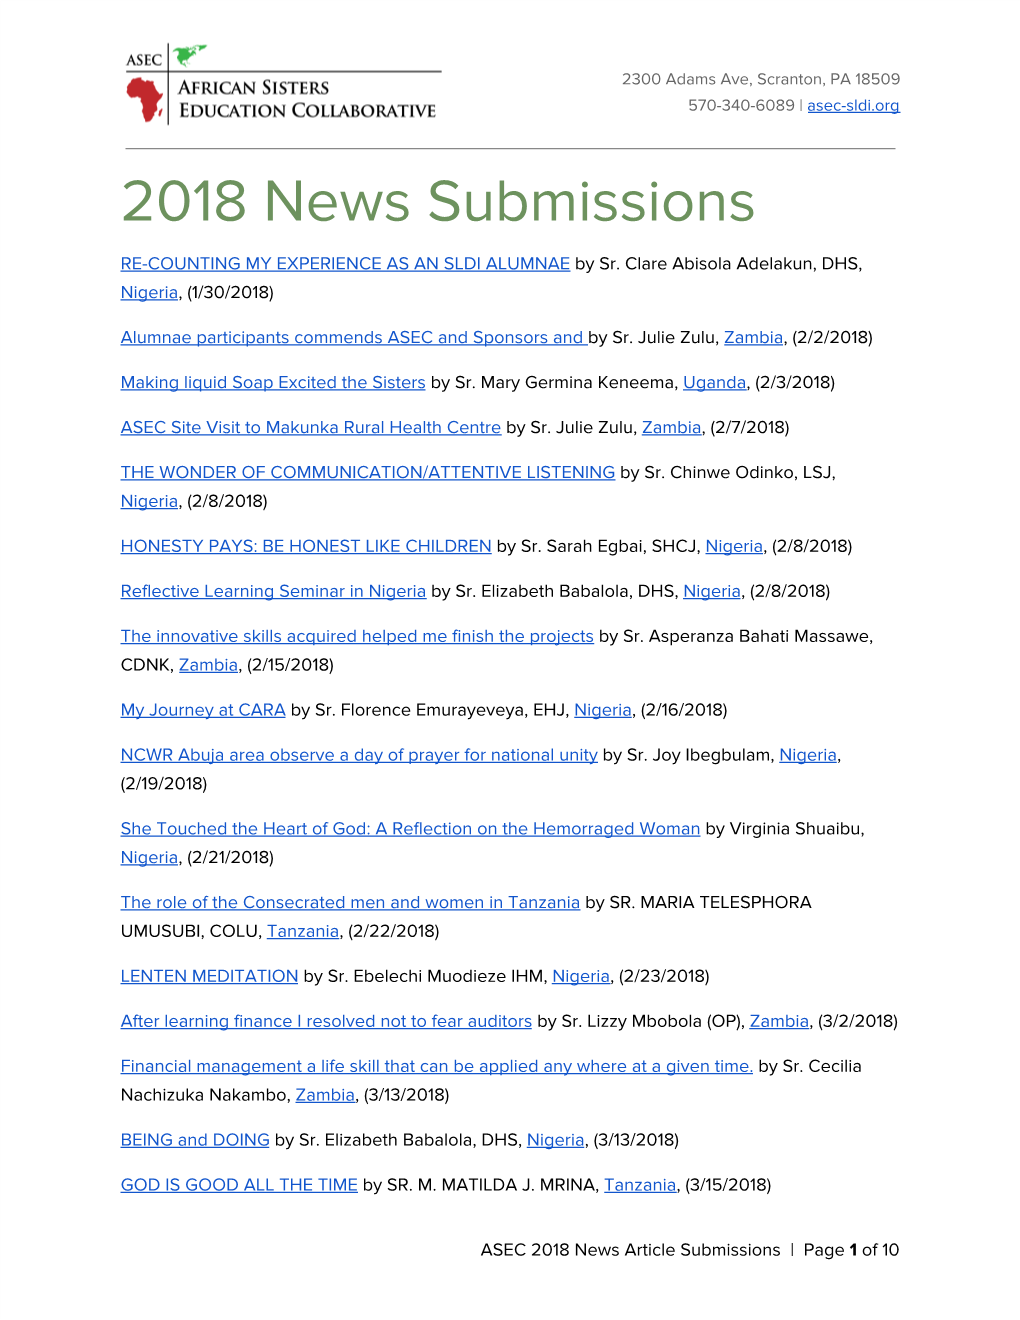 2018 ASEC News Article Submissions